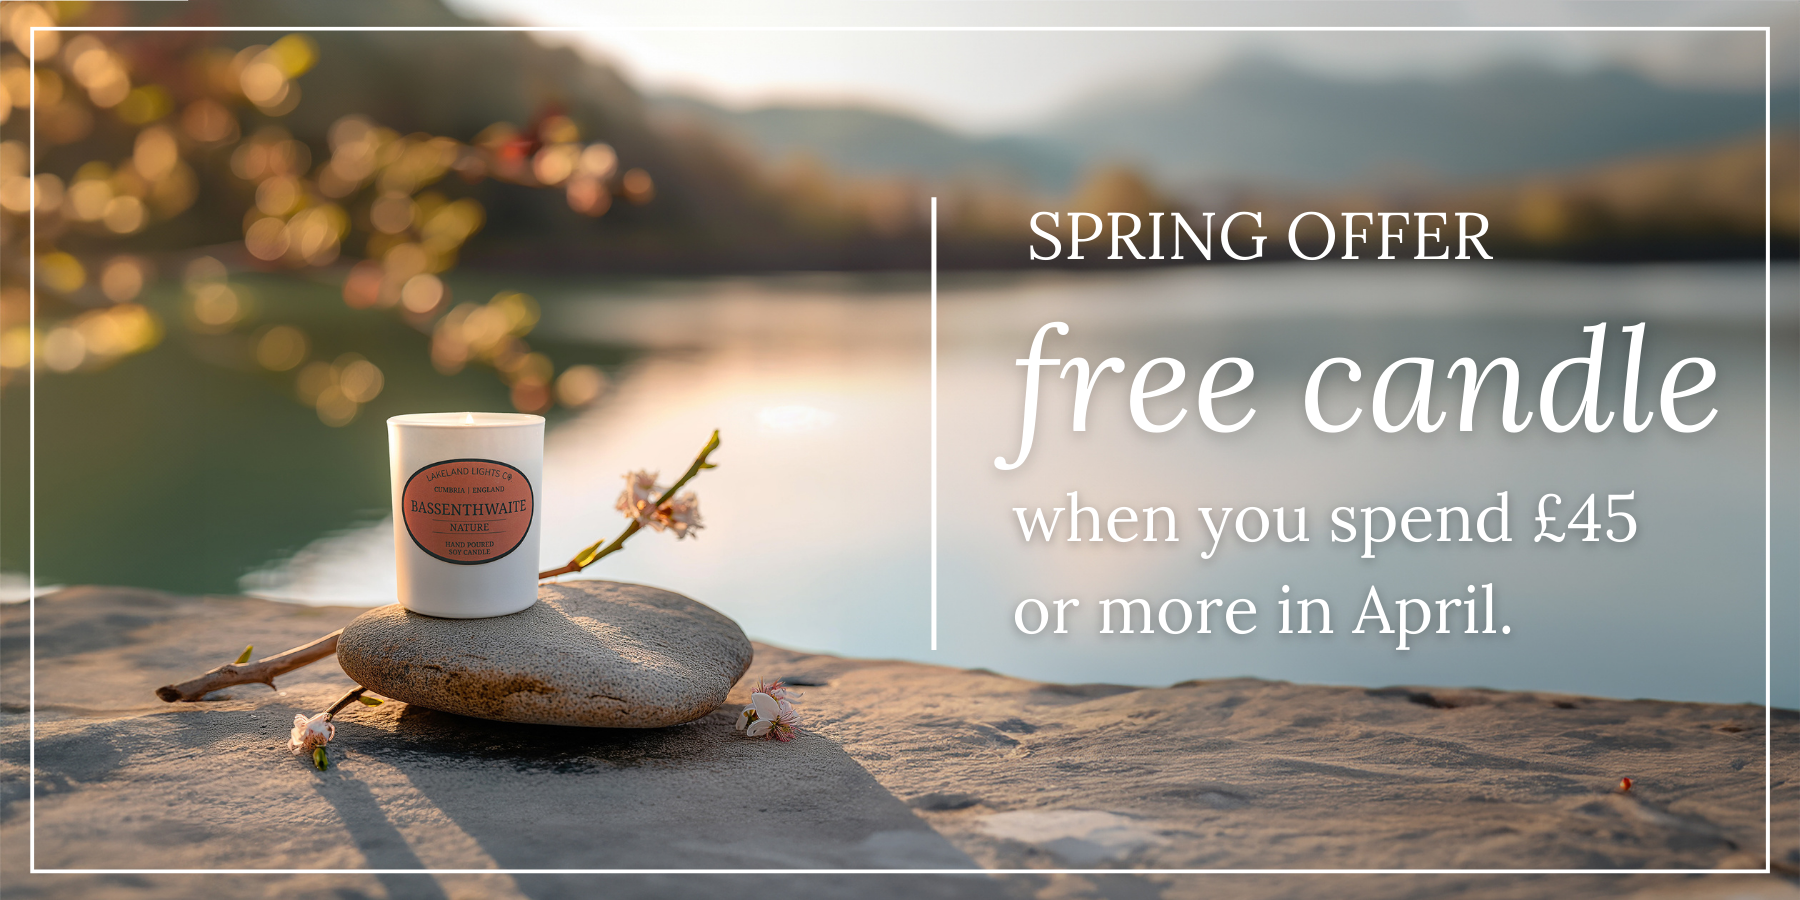 Spring Offer! Free Candle on Orders Over £45